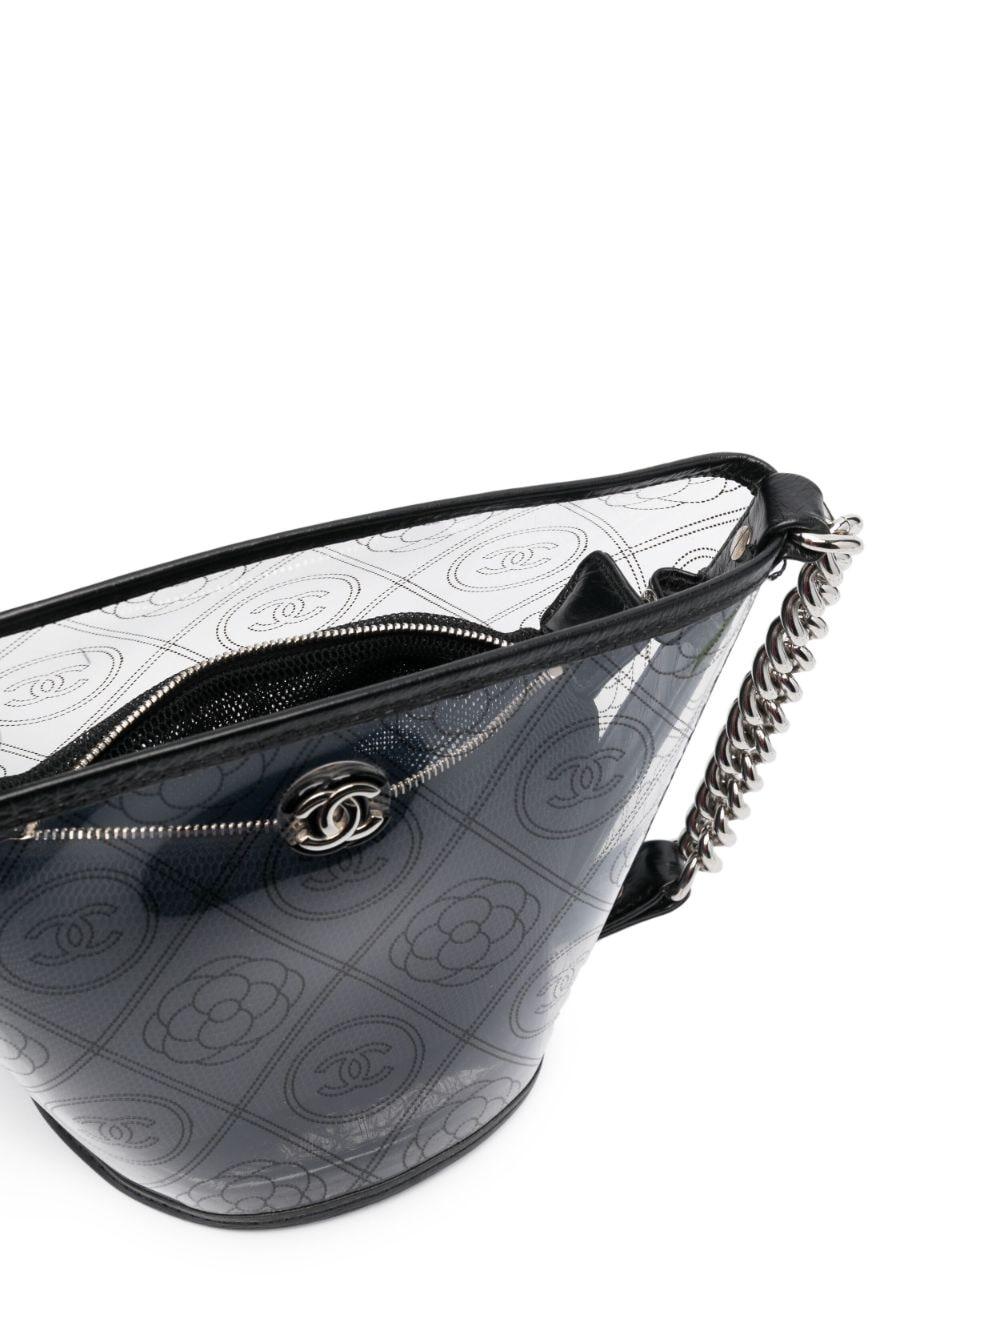 Chanel 2018 Spring Summer Transparent Clear PVC Camellia Small Mini Bucket Bag  For Sale 4